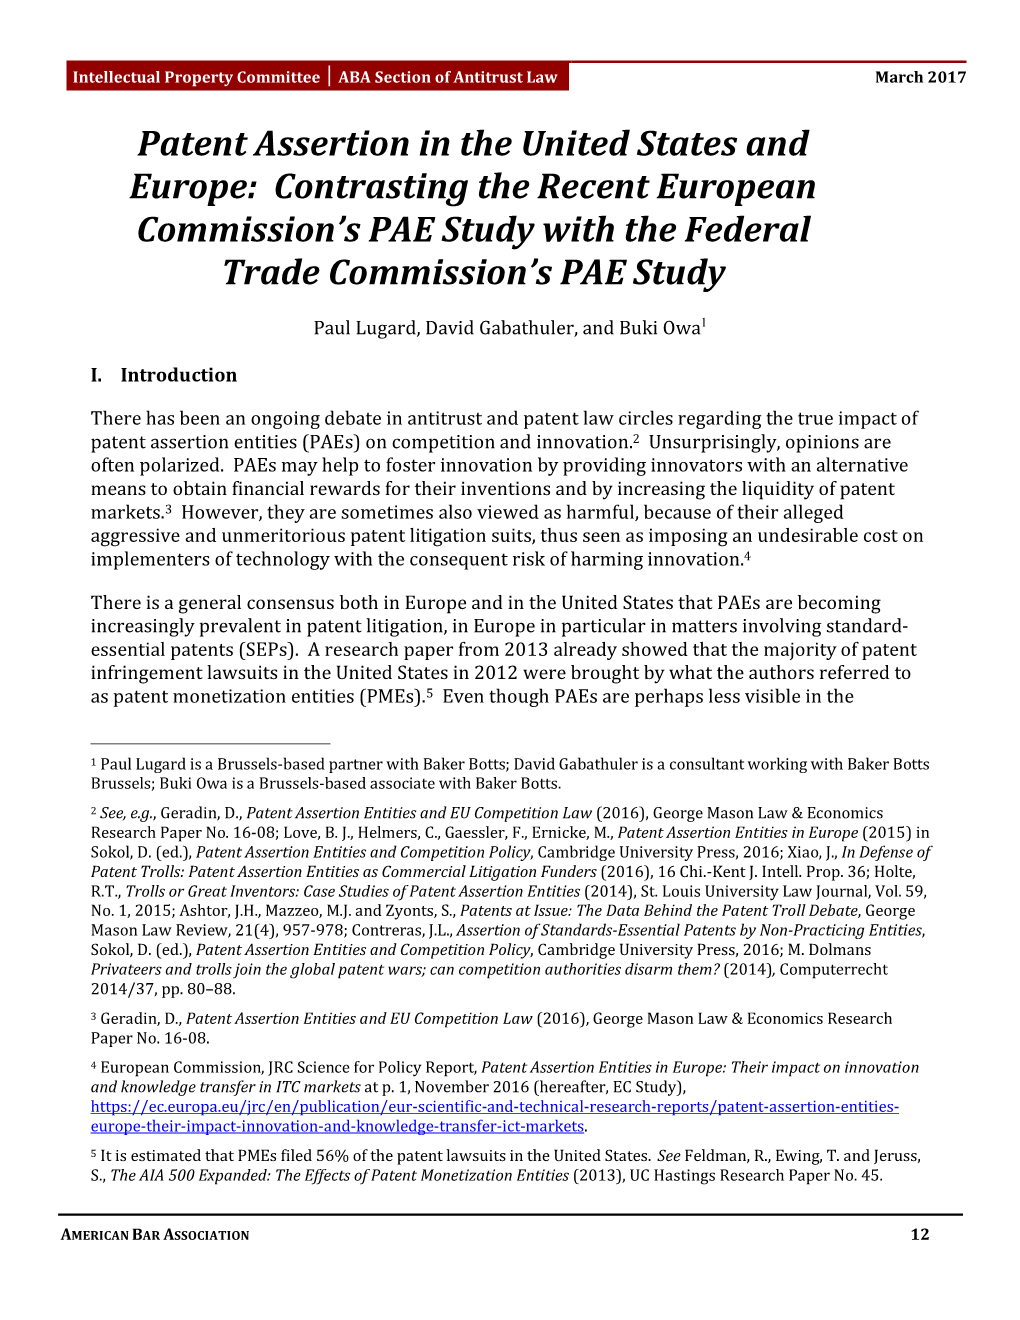 Patent Assertion in the United States and Europe: Contrasting the Recent European Commission’S PAE Study with the Federal Trade Commission’S PAE Study